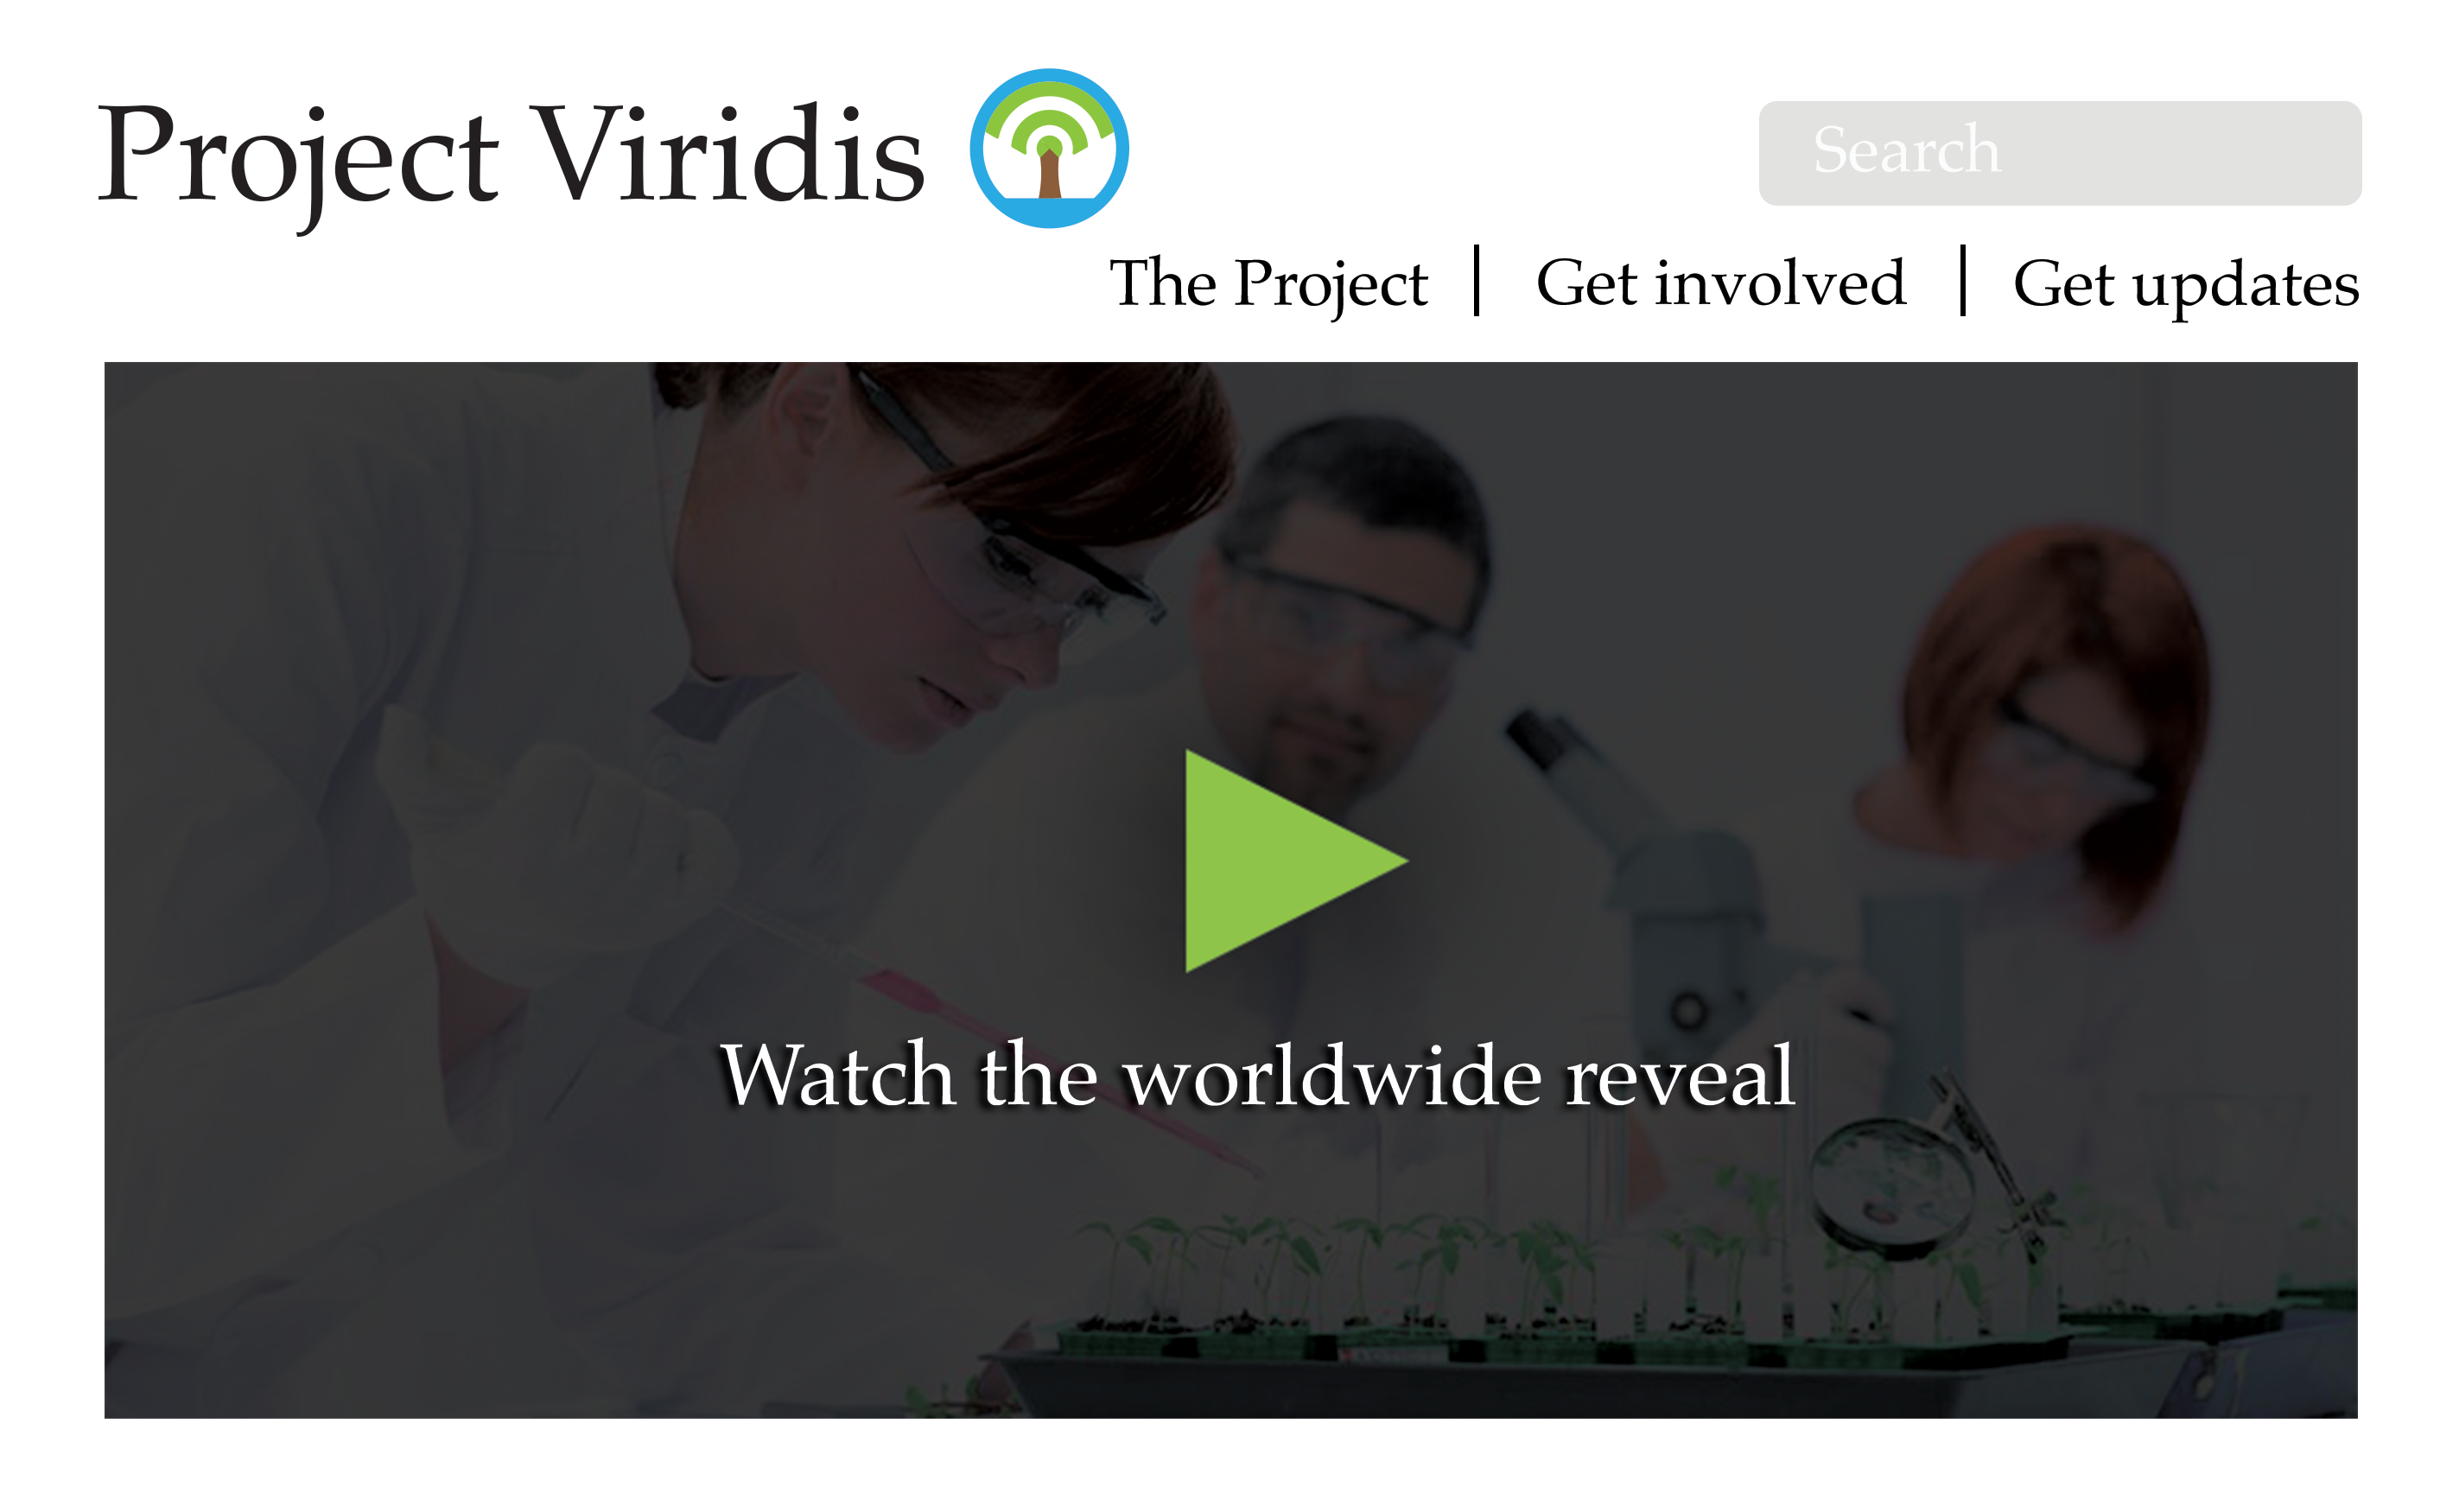 Project Viridis, by Dominic Celica